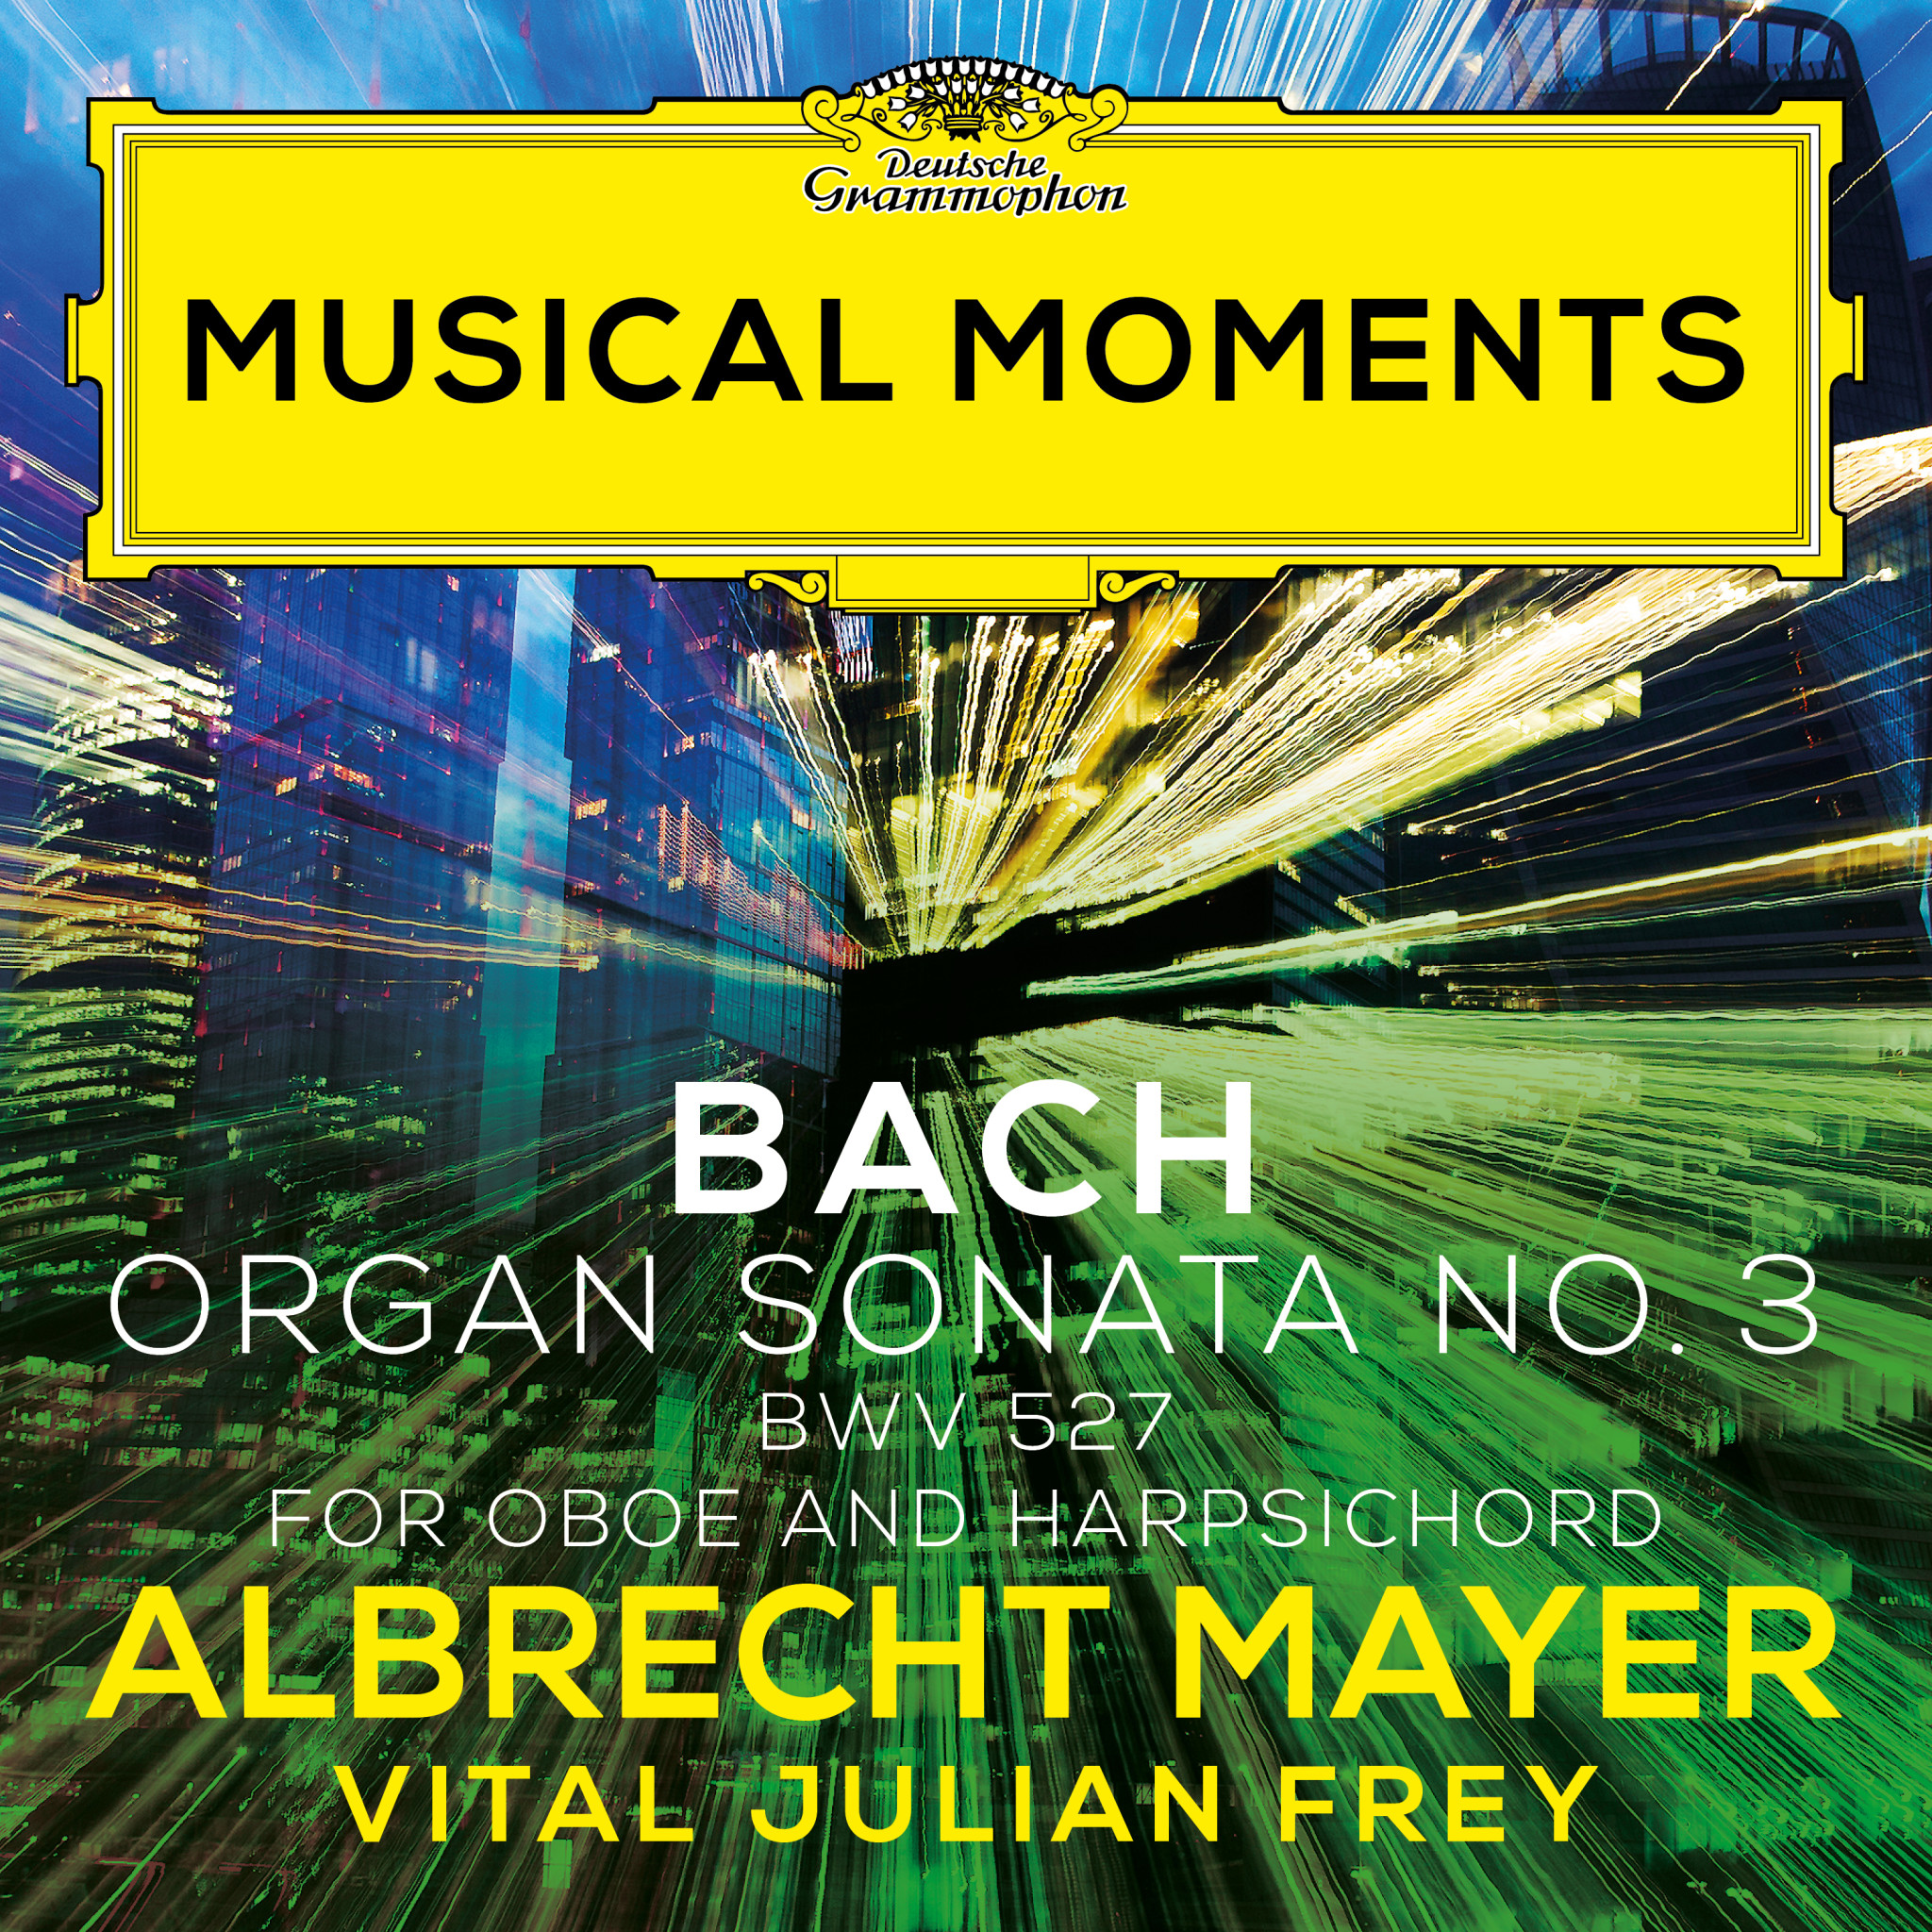 Albrecht Mayer - J.S. Bach: Organ Sonata No. 3 in D Minor, BWV 527 (Adapt. for Oboe and Harpsichord by Mayer and Frey) Musical Moments Cover